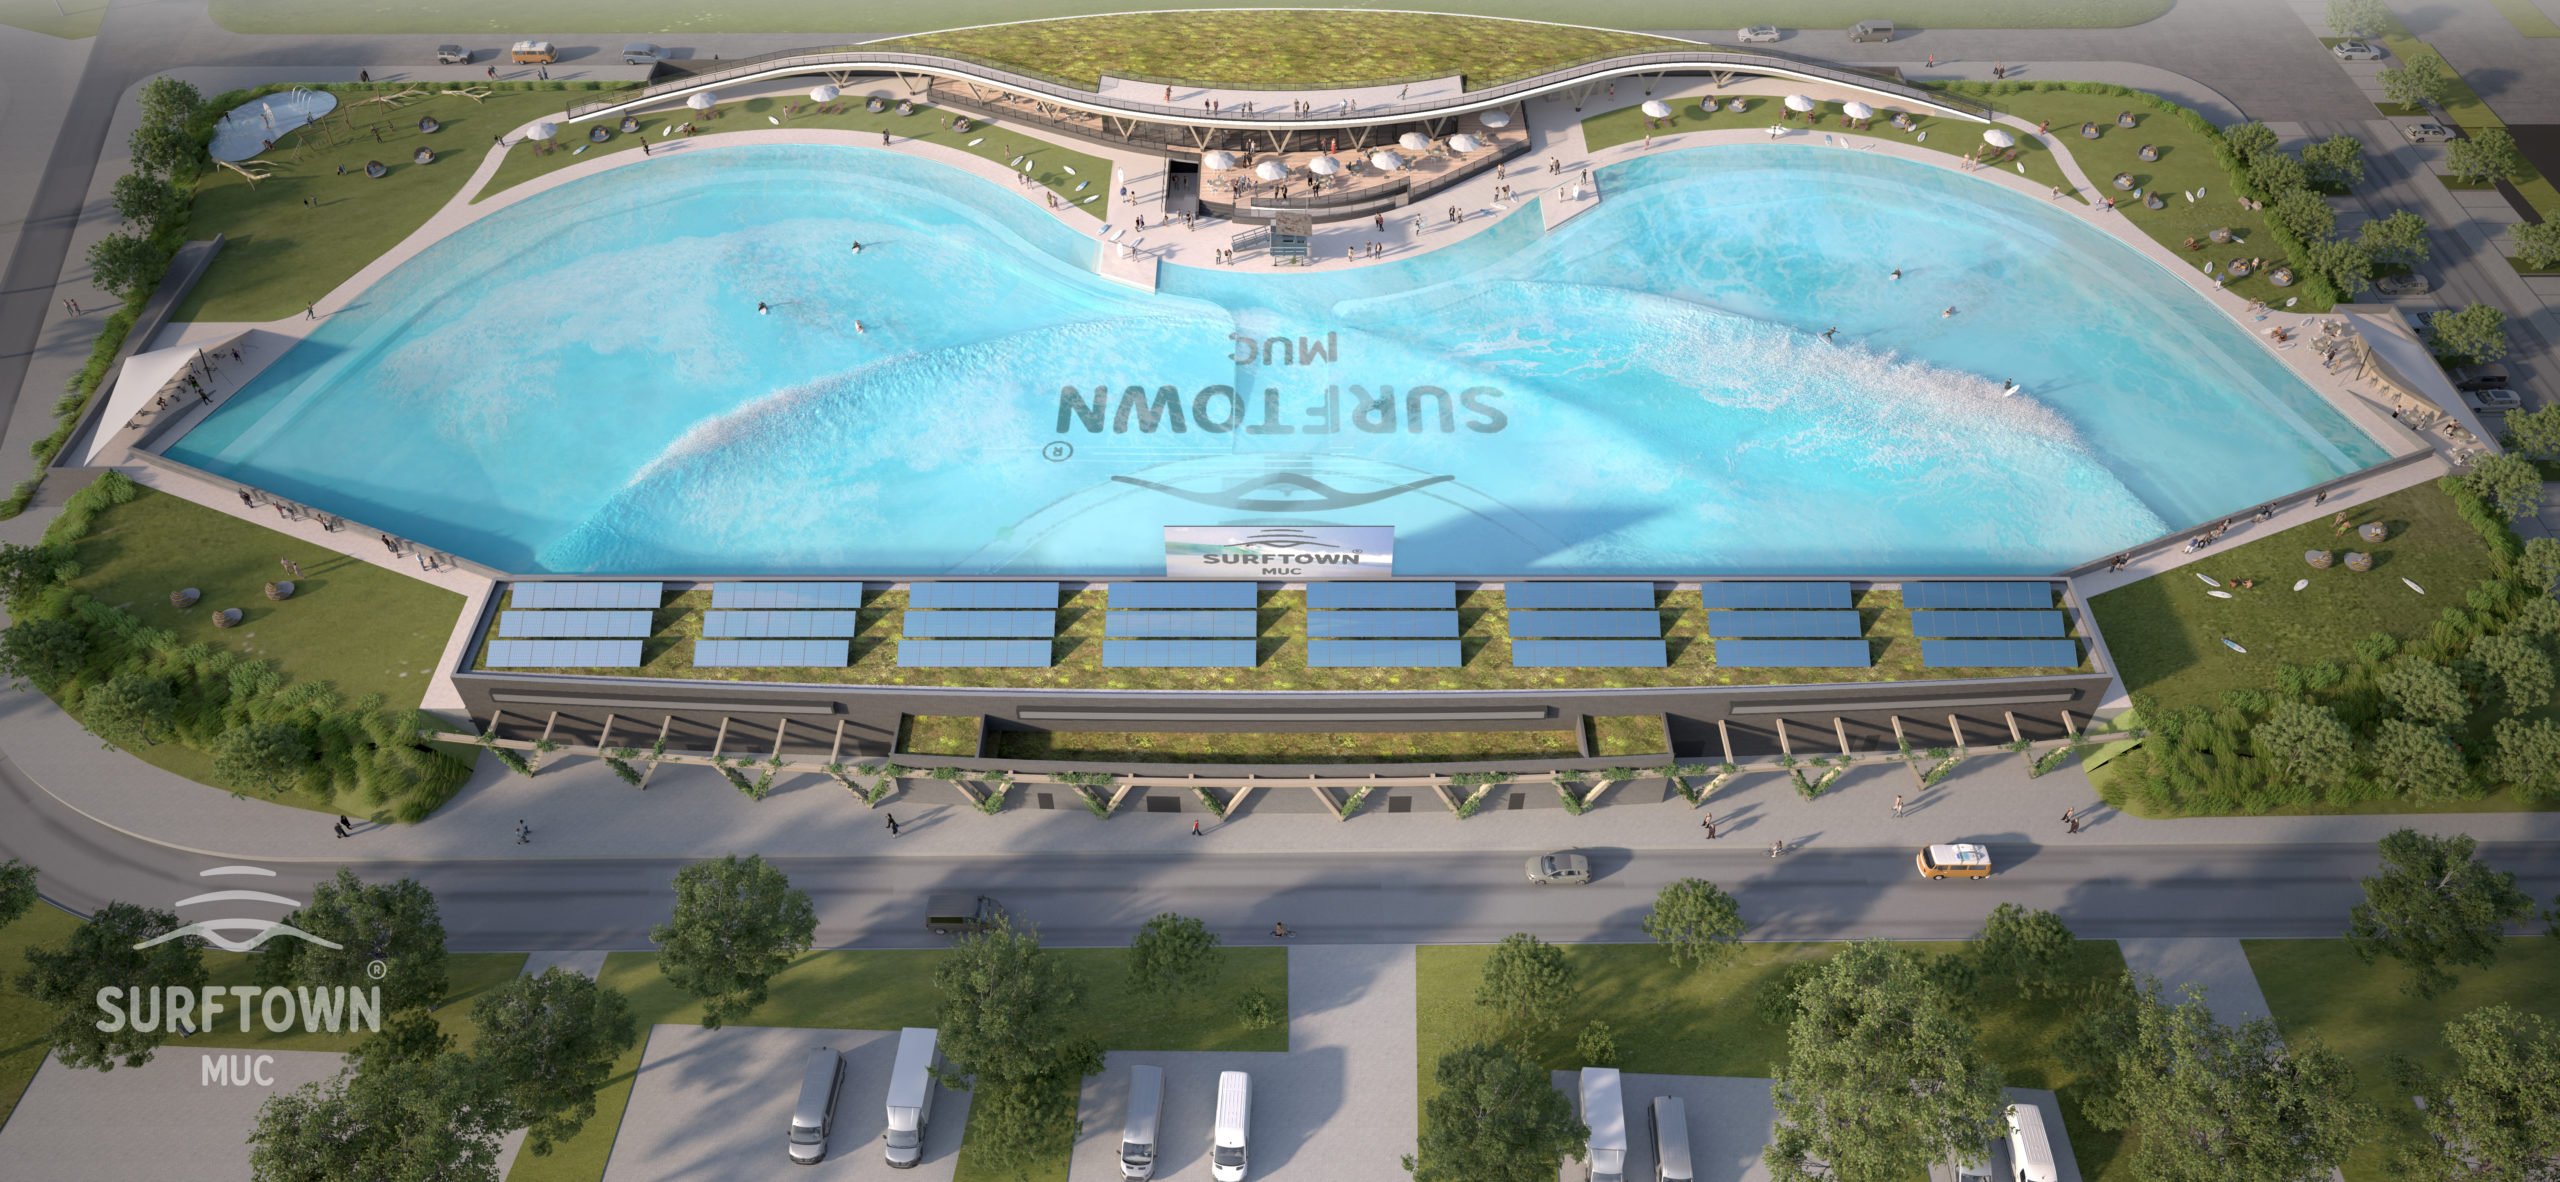 Aerial Concept Plan of SURFTOWN MUC featuring Endless Surf wave pool technology